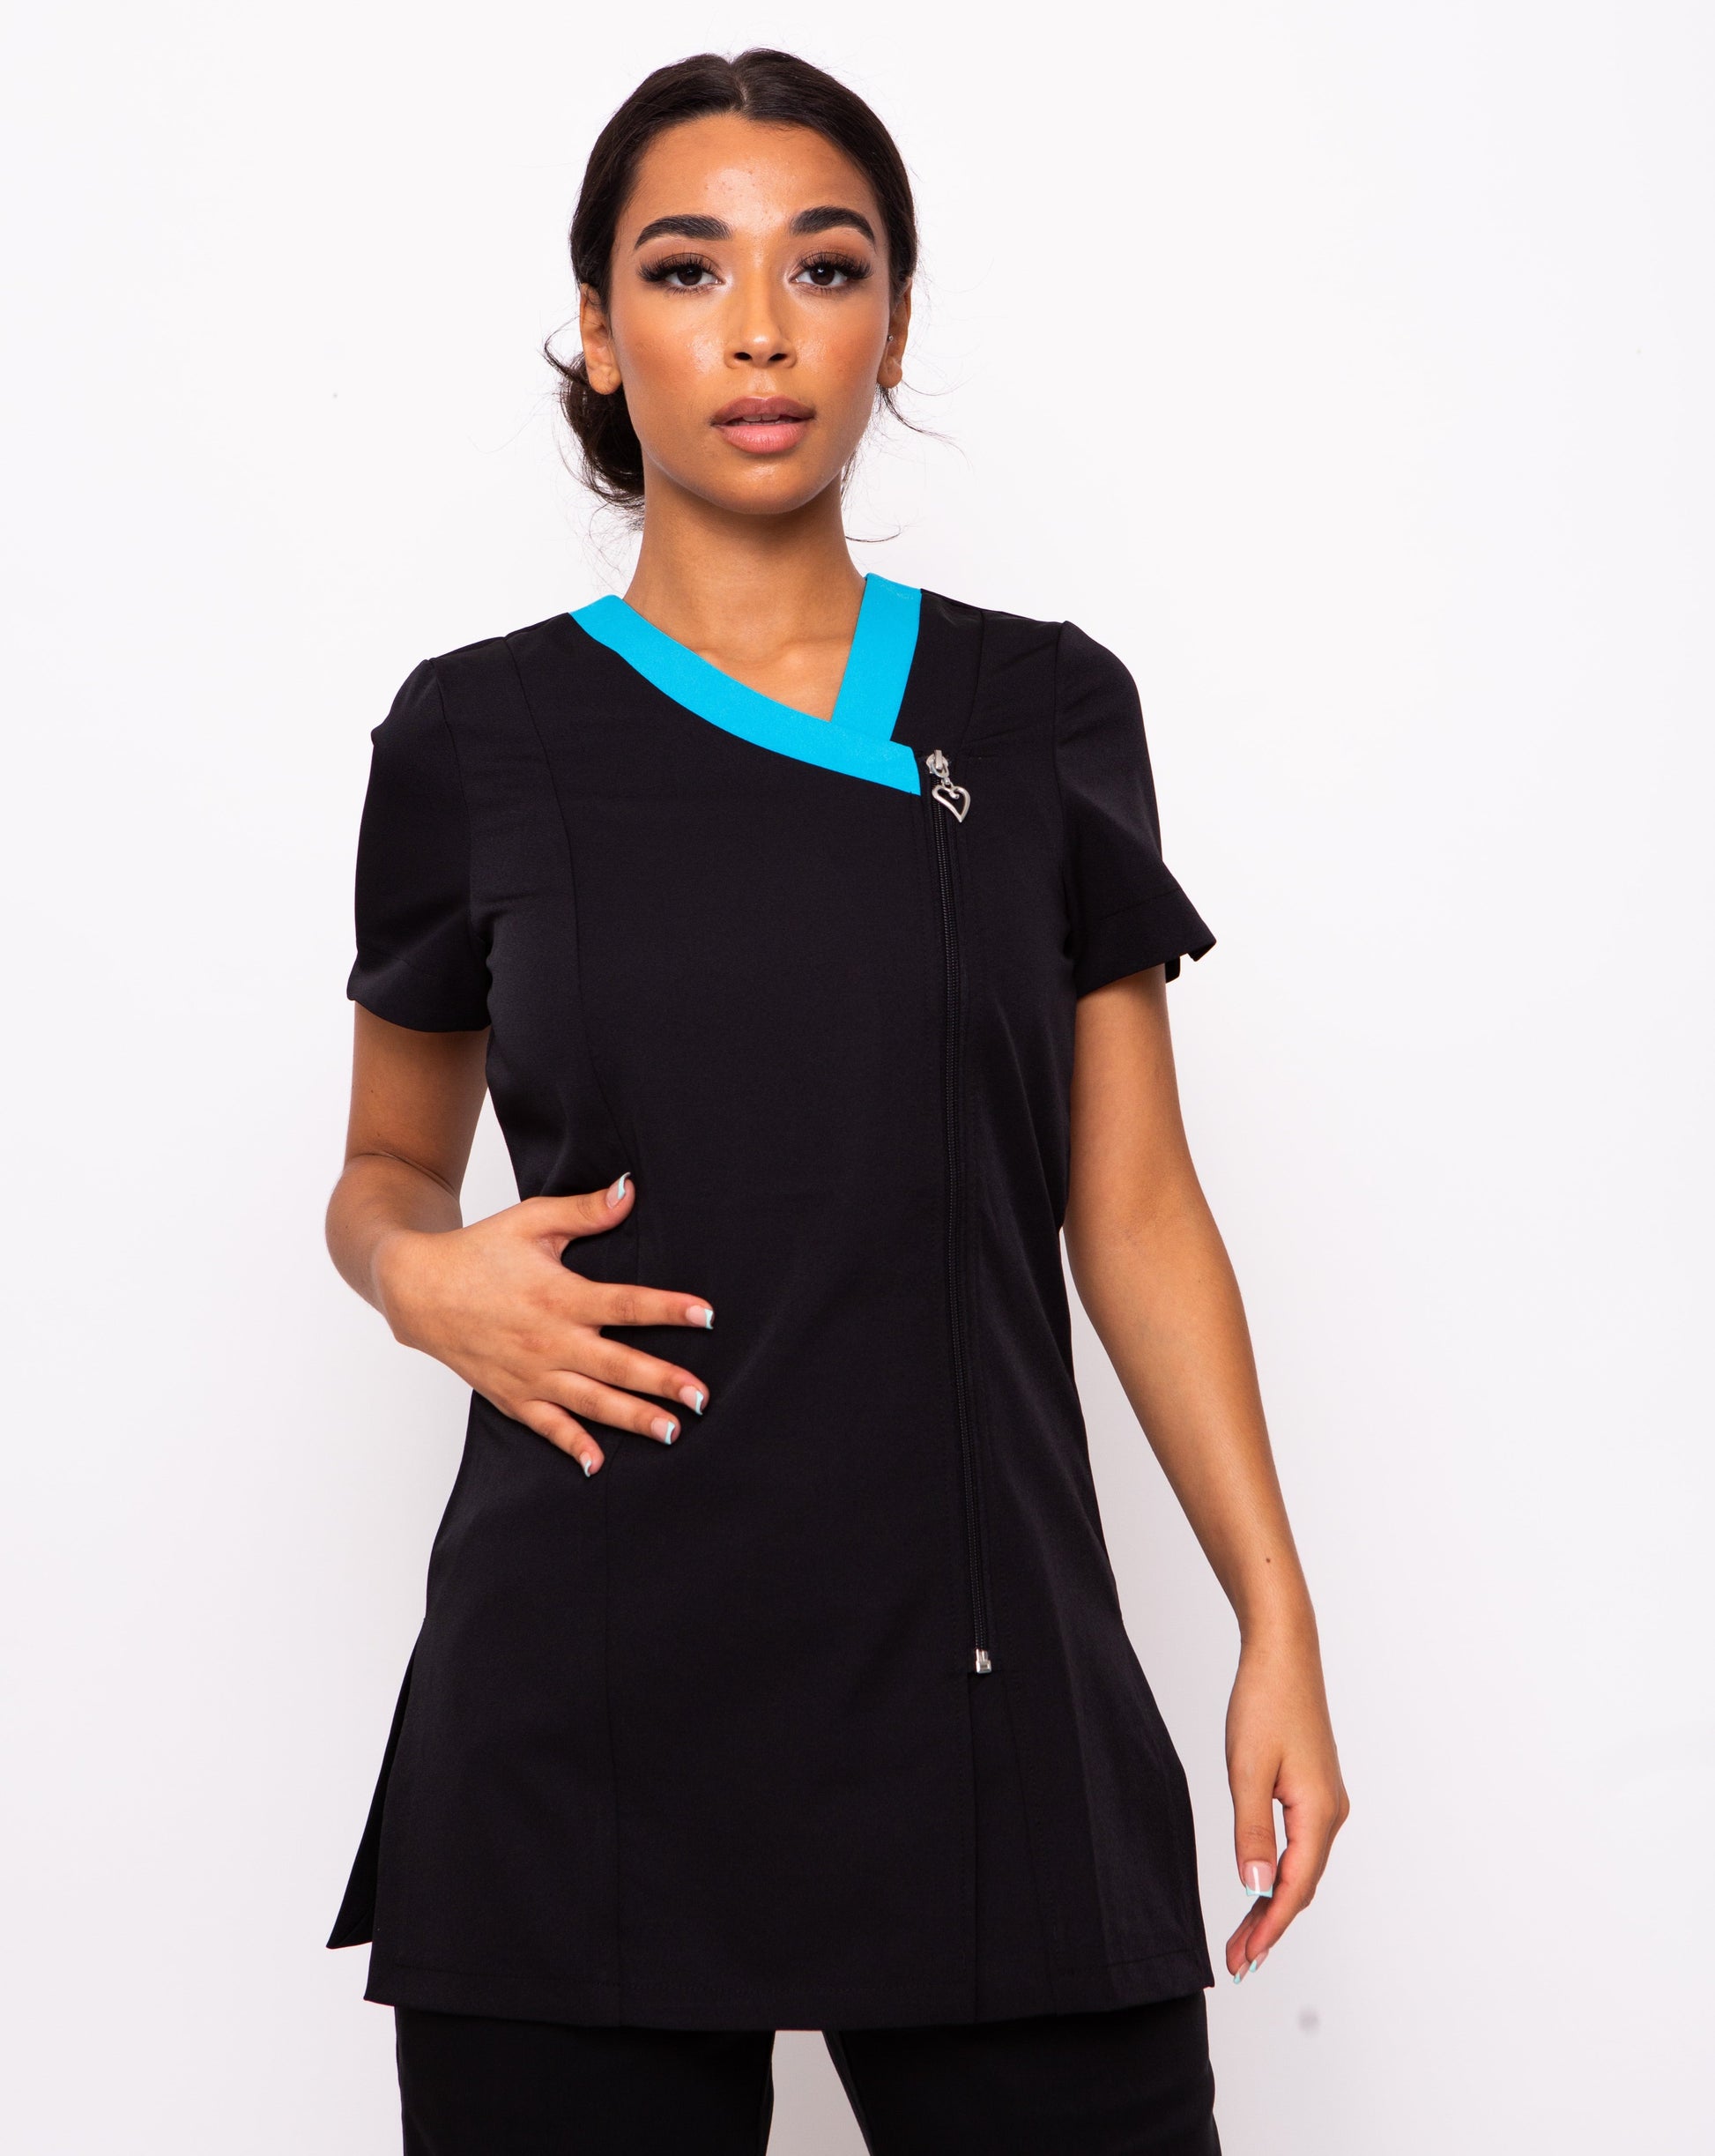 Black and teal beauty tunic